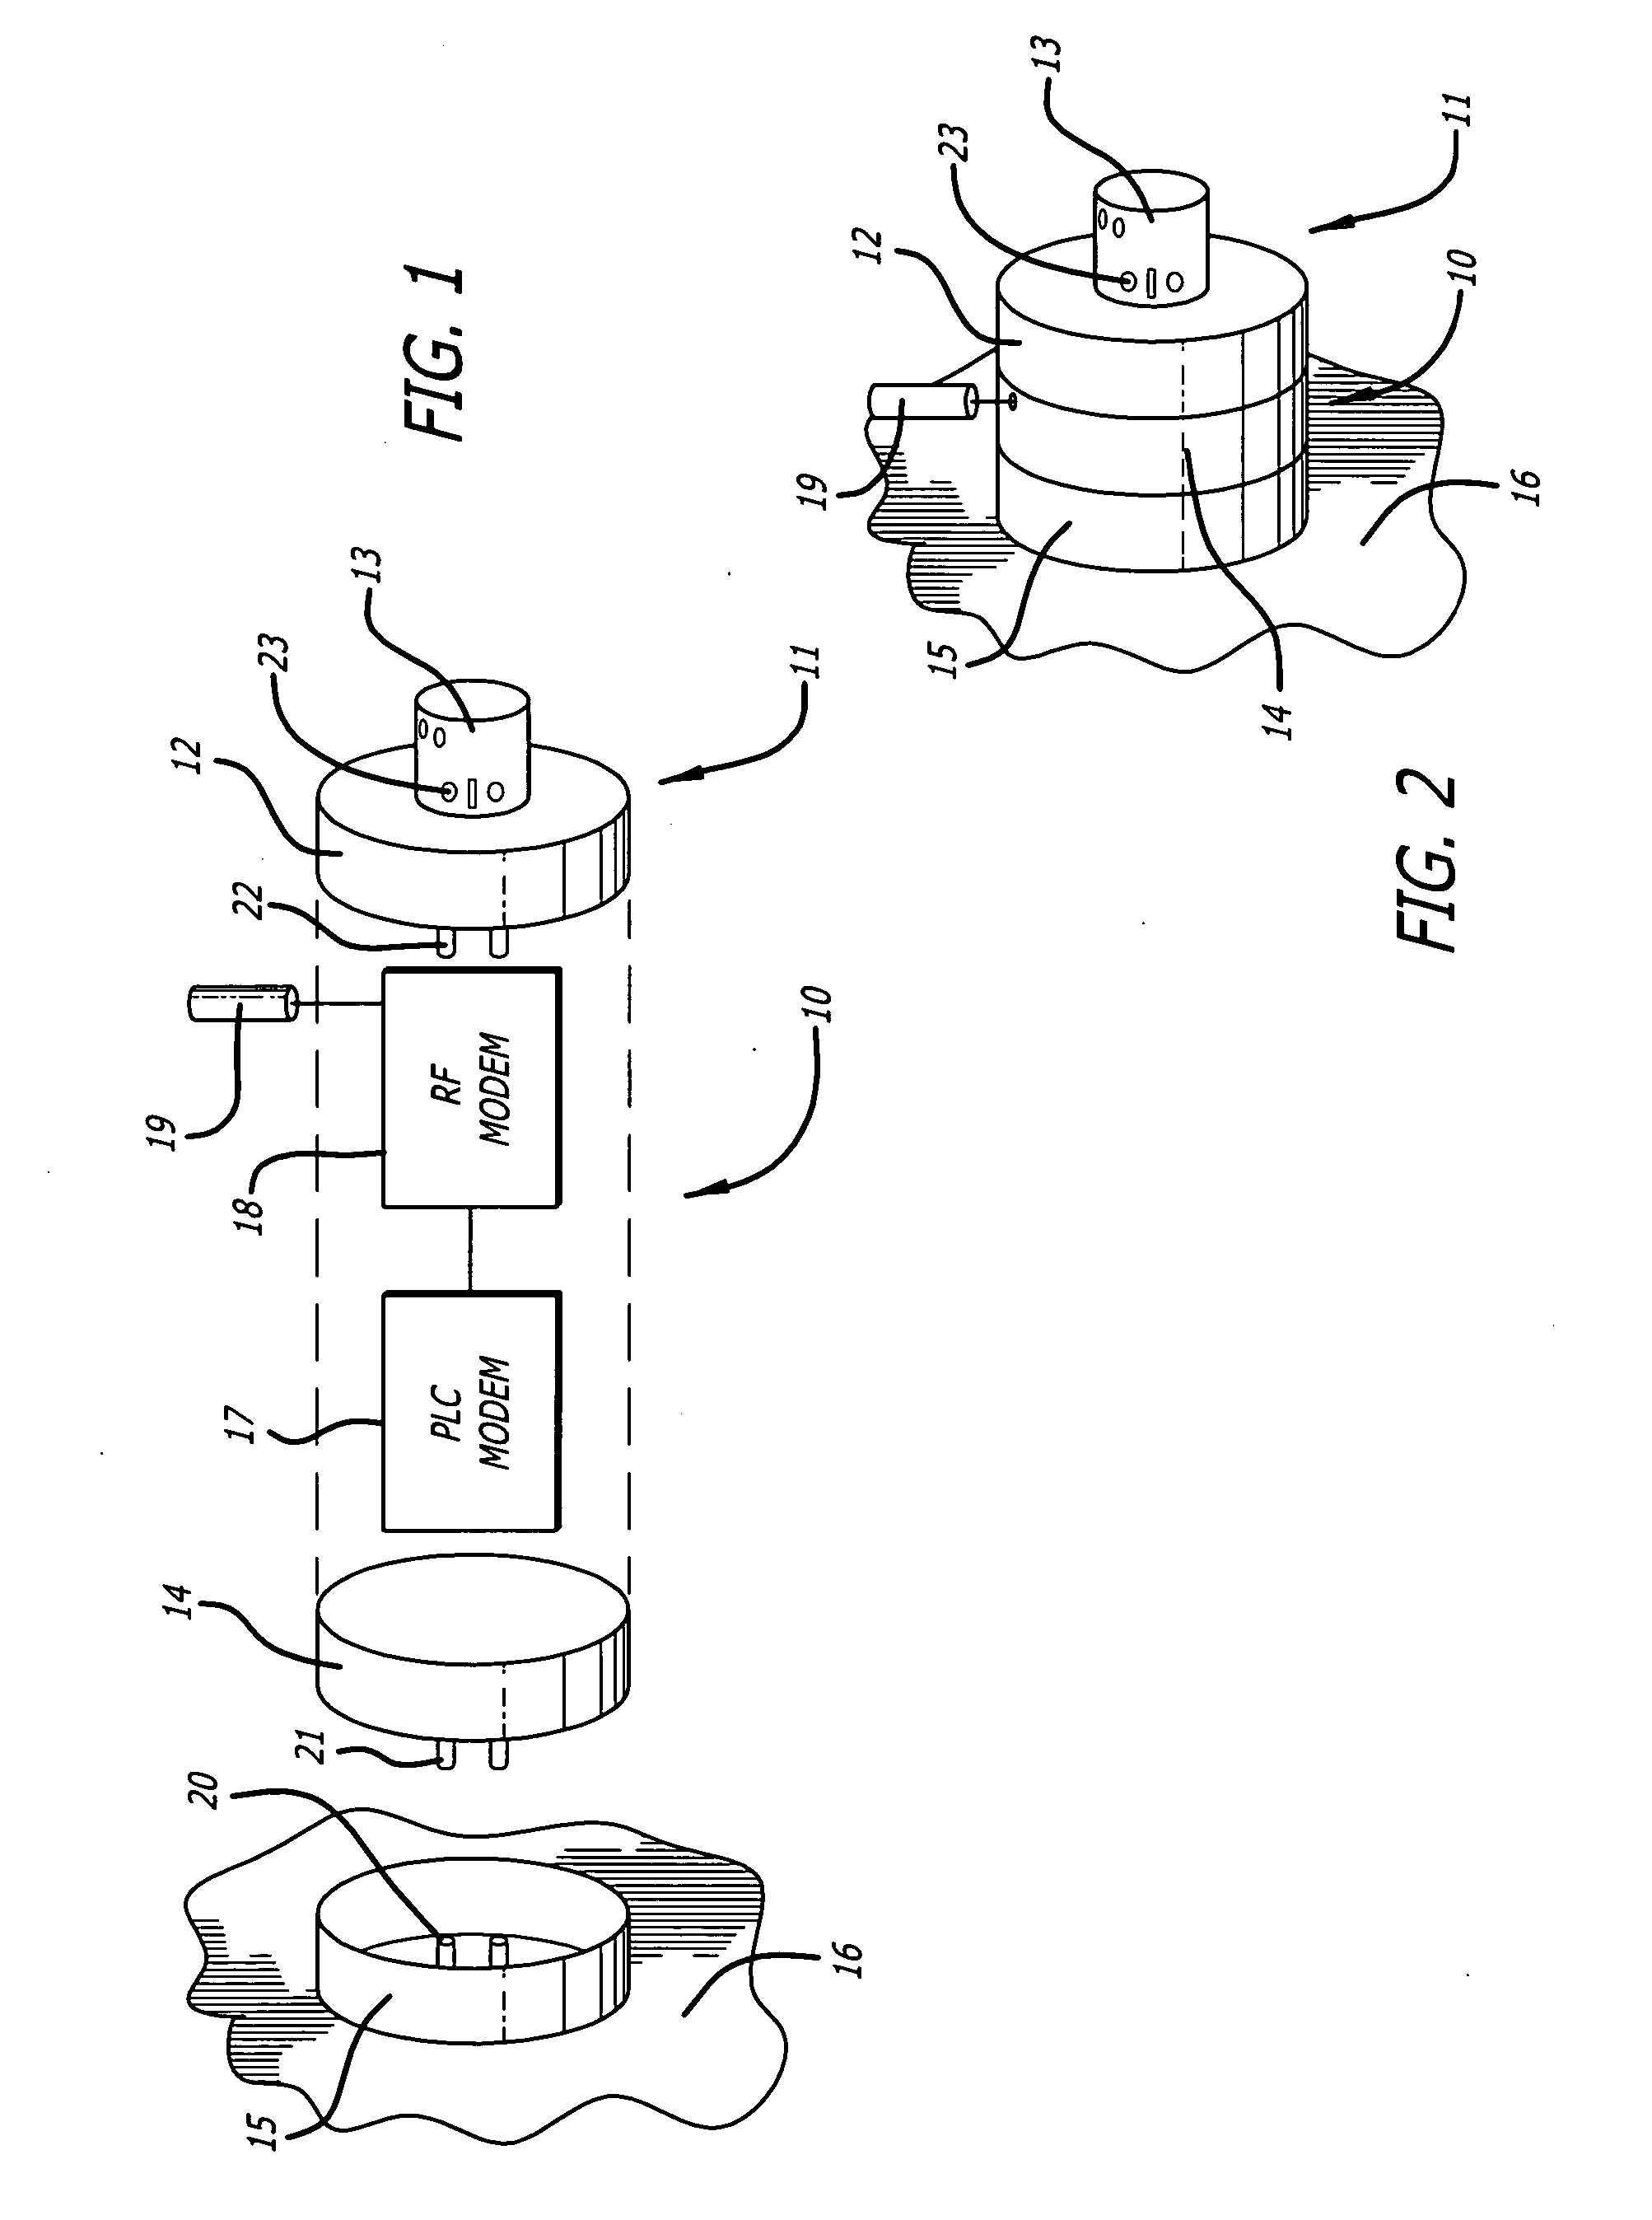 Apparatus and method for utilizing a pre-existing power grid to provide internet access to a home or office or the like